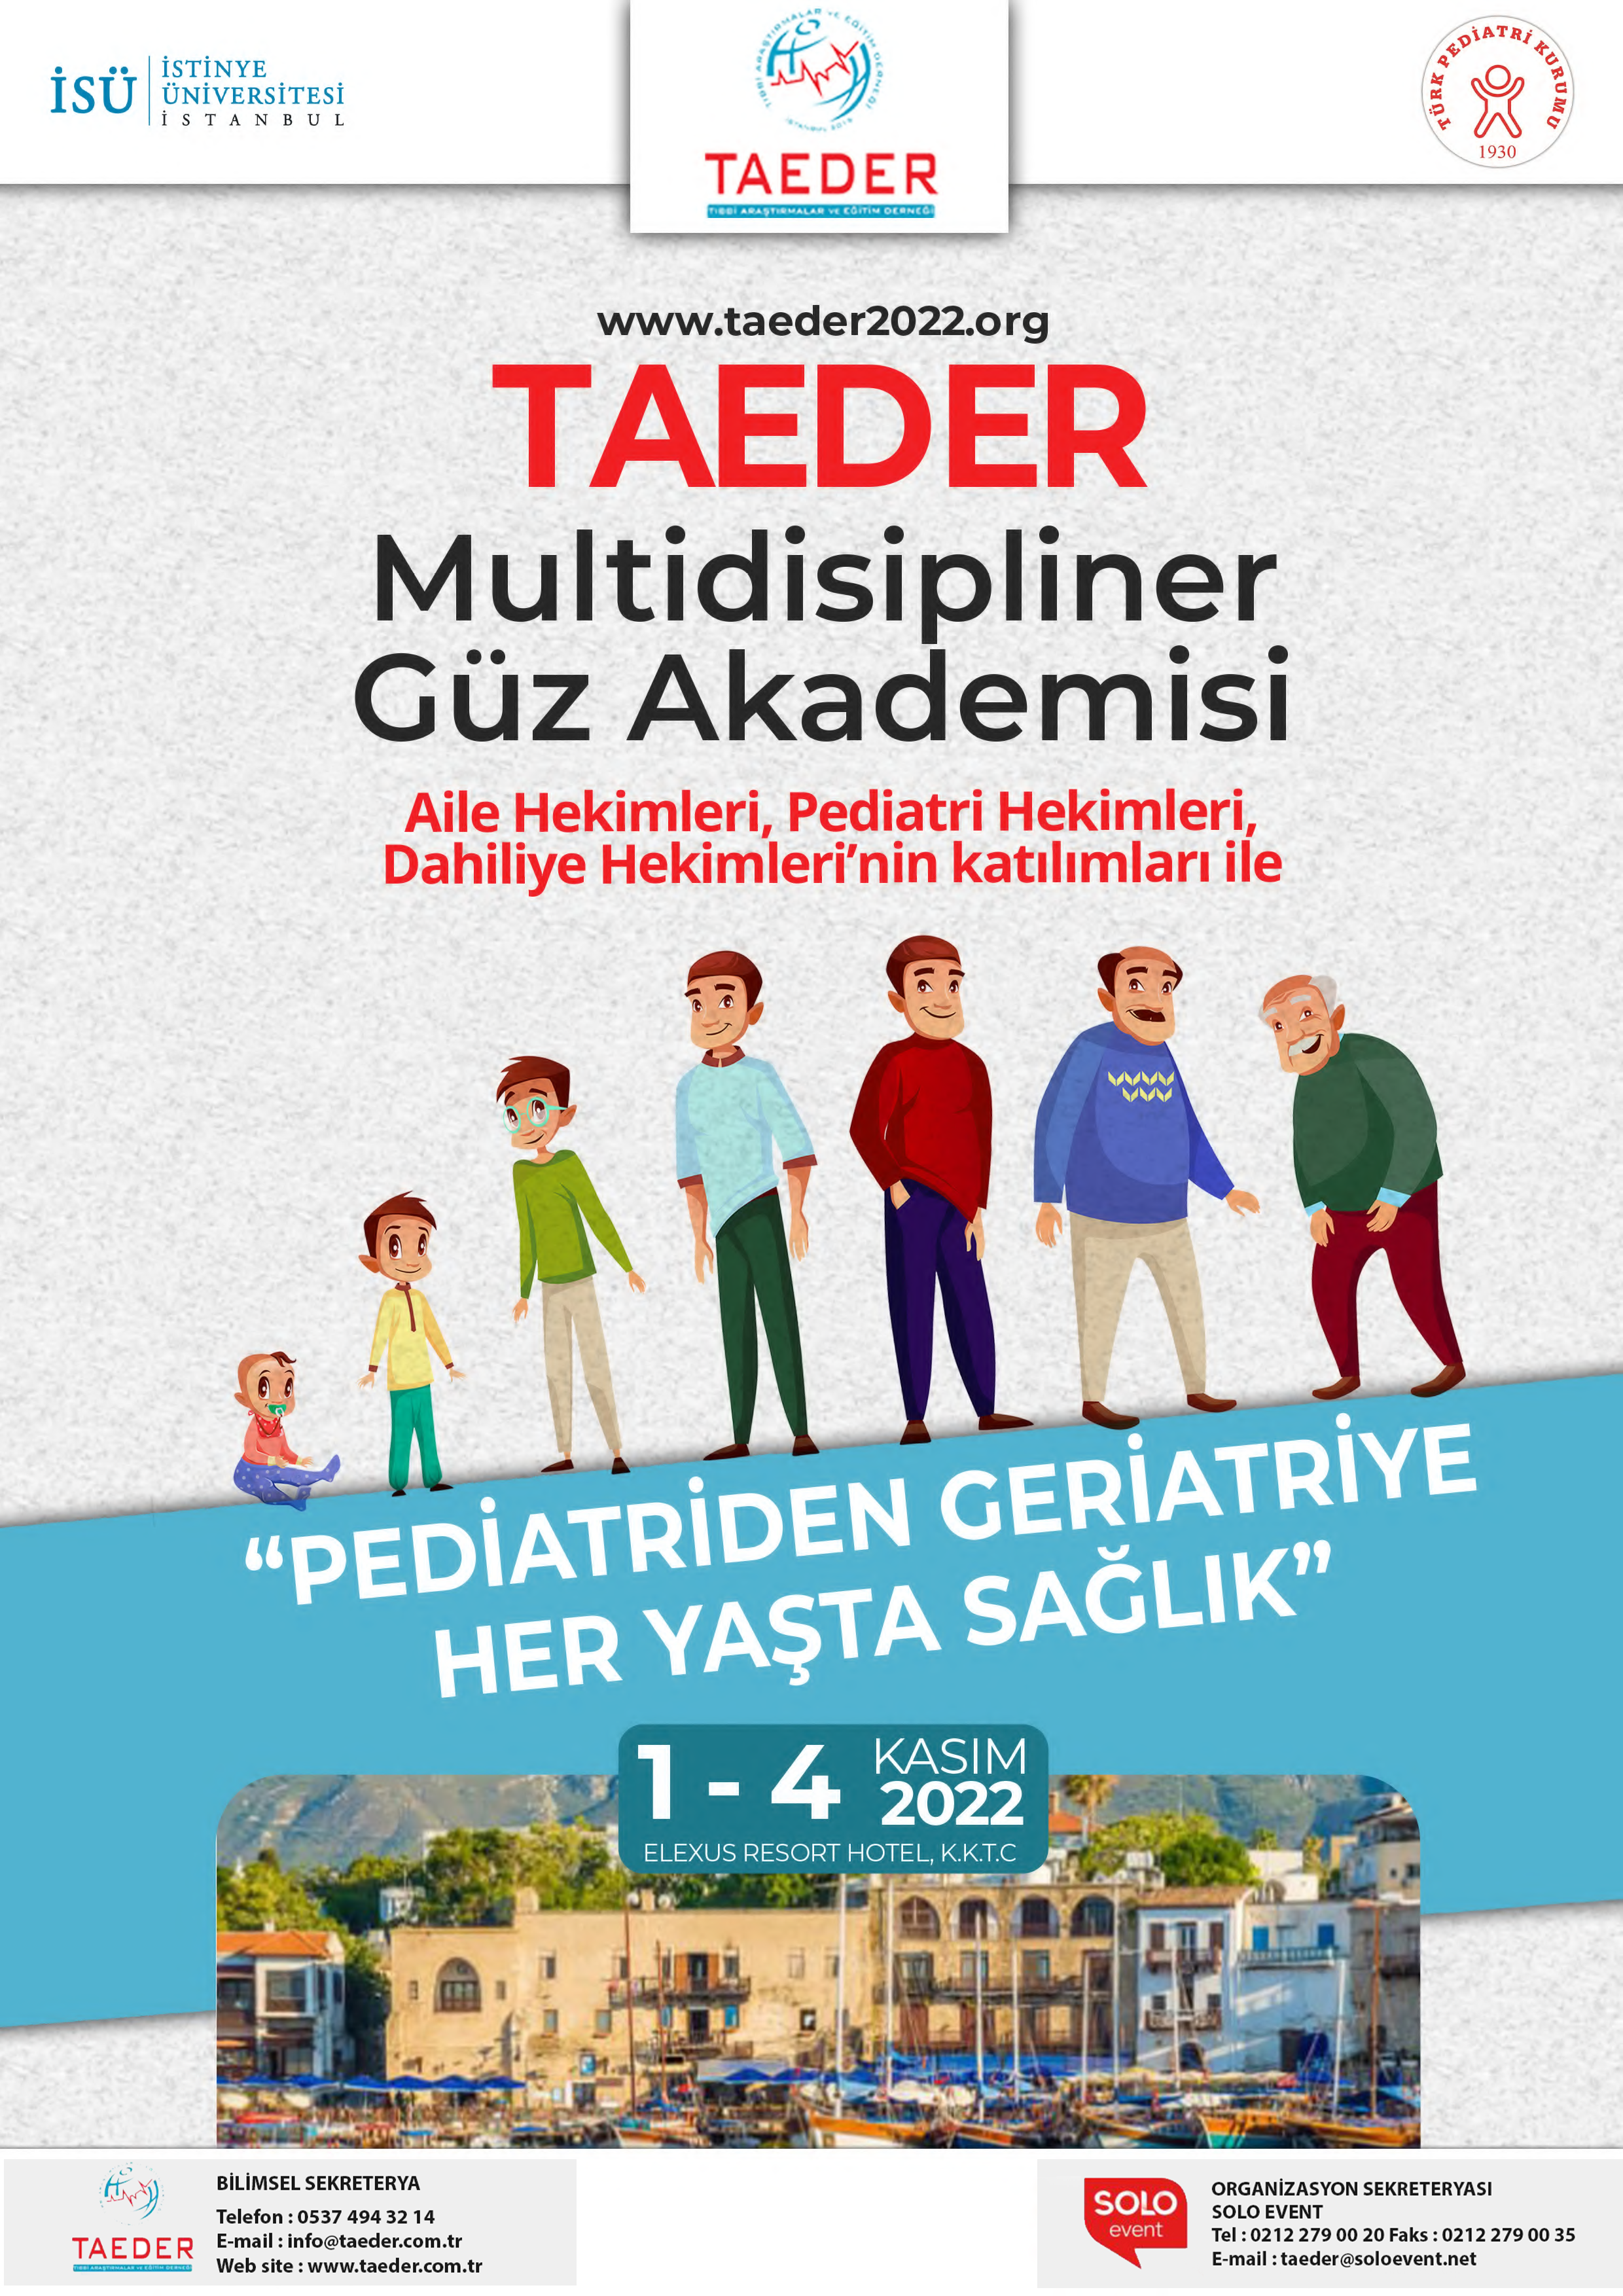 TAEDER "Health at All Ages from Pediatrics to Geriatrics"